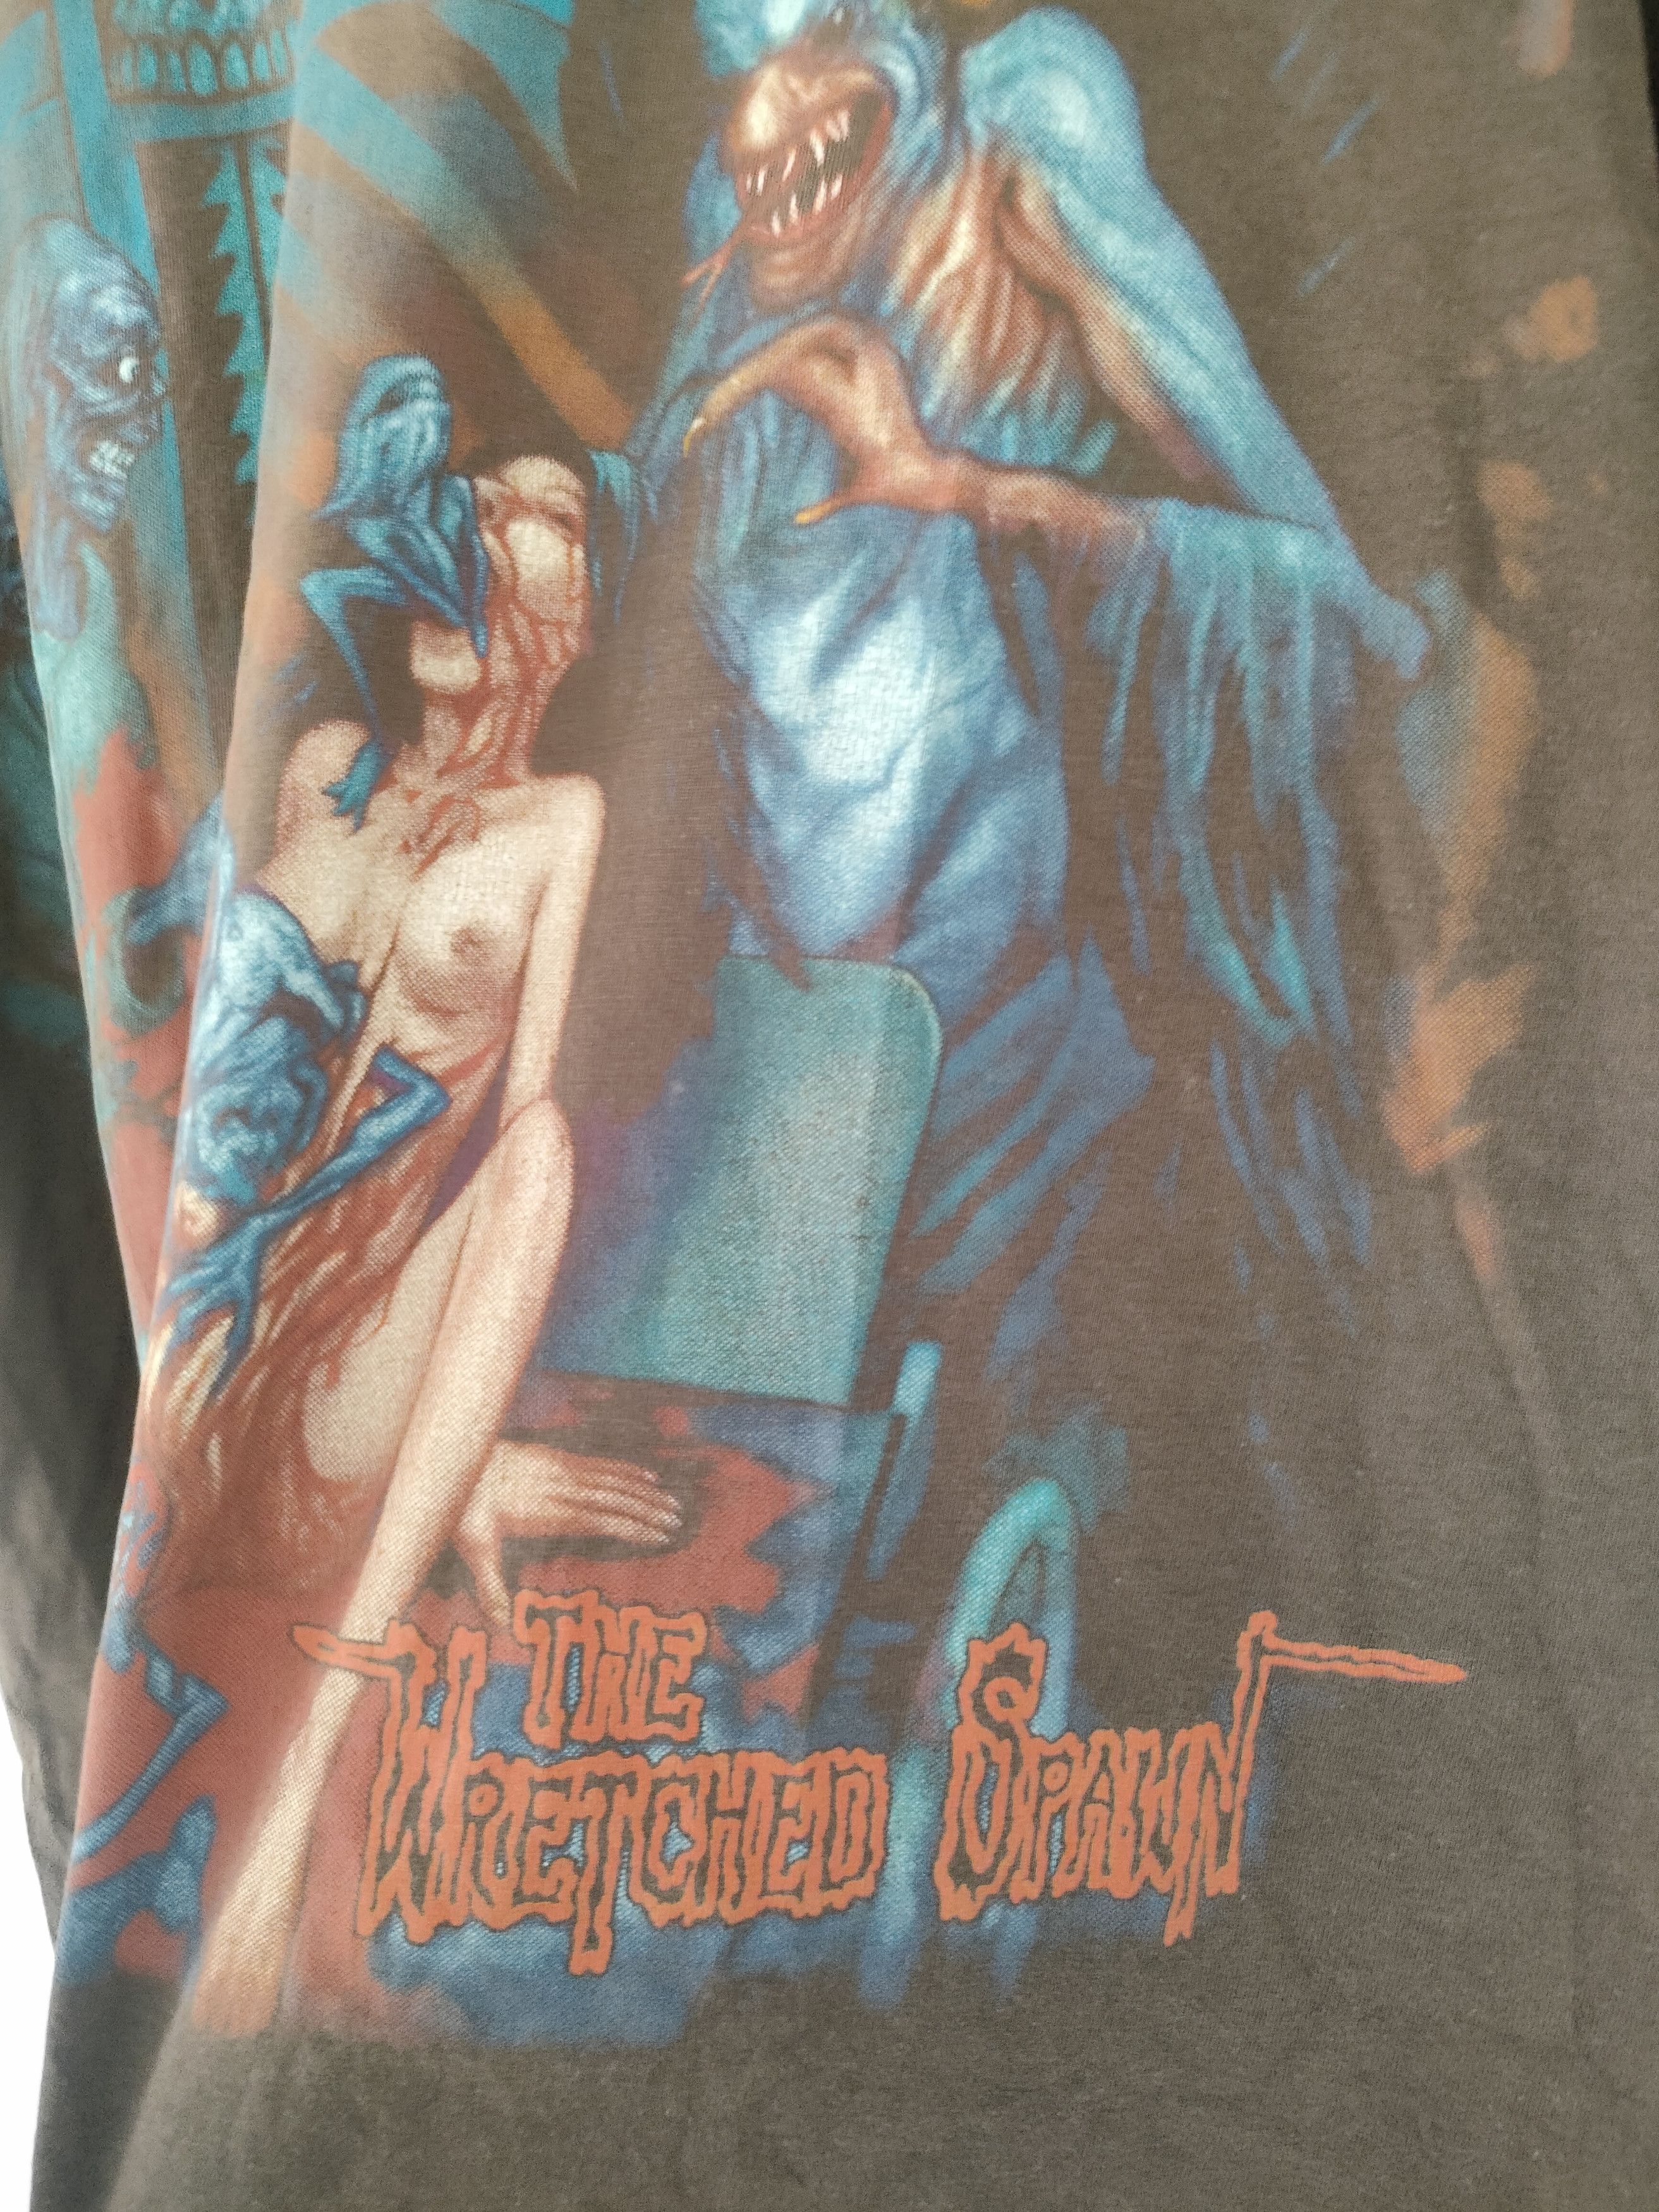 CANNIBAL CORPSE VINTAGE SHIRT THE WRETCHED SPAWN - 9